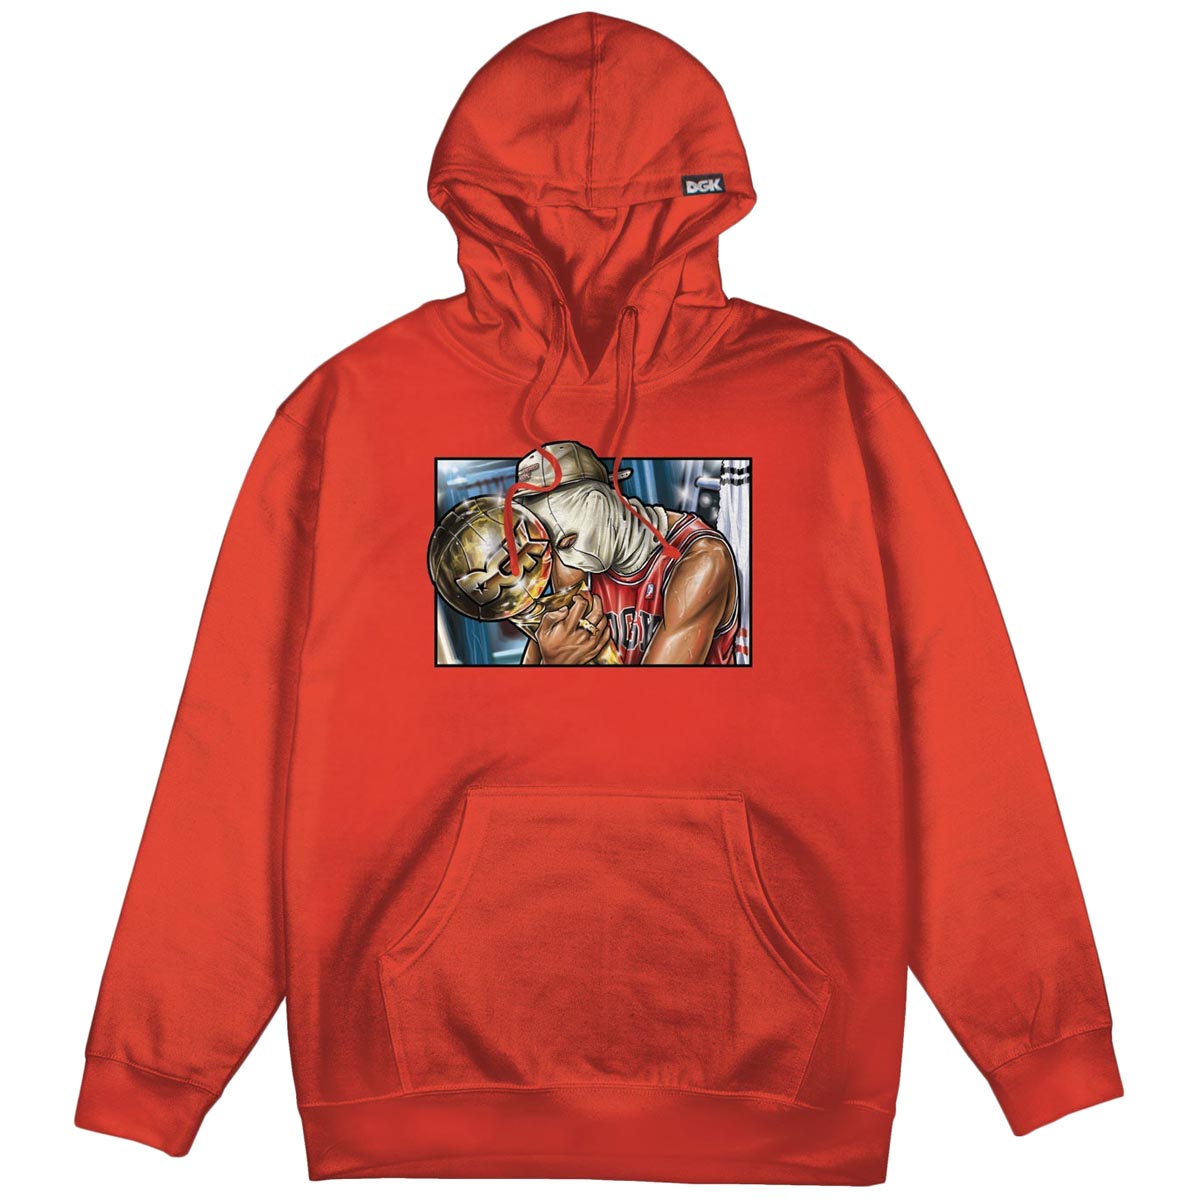 DGK Champ Hoodie - Red image 1